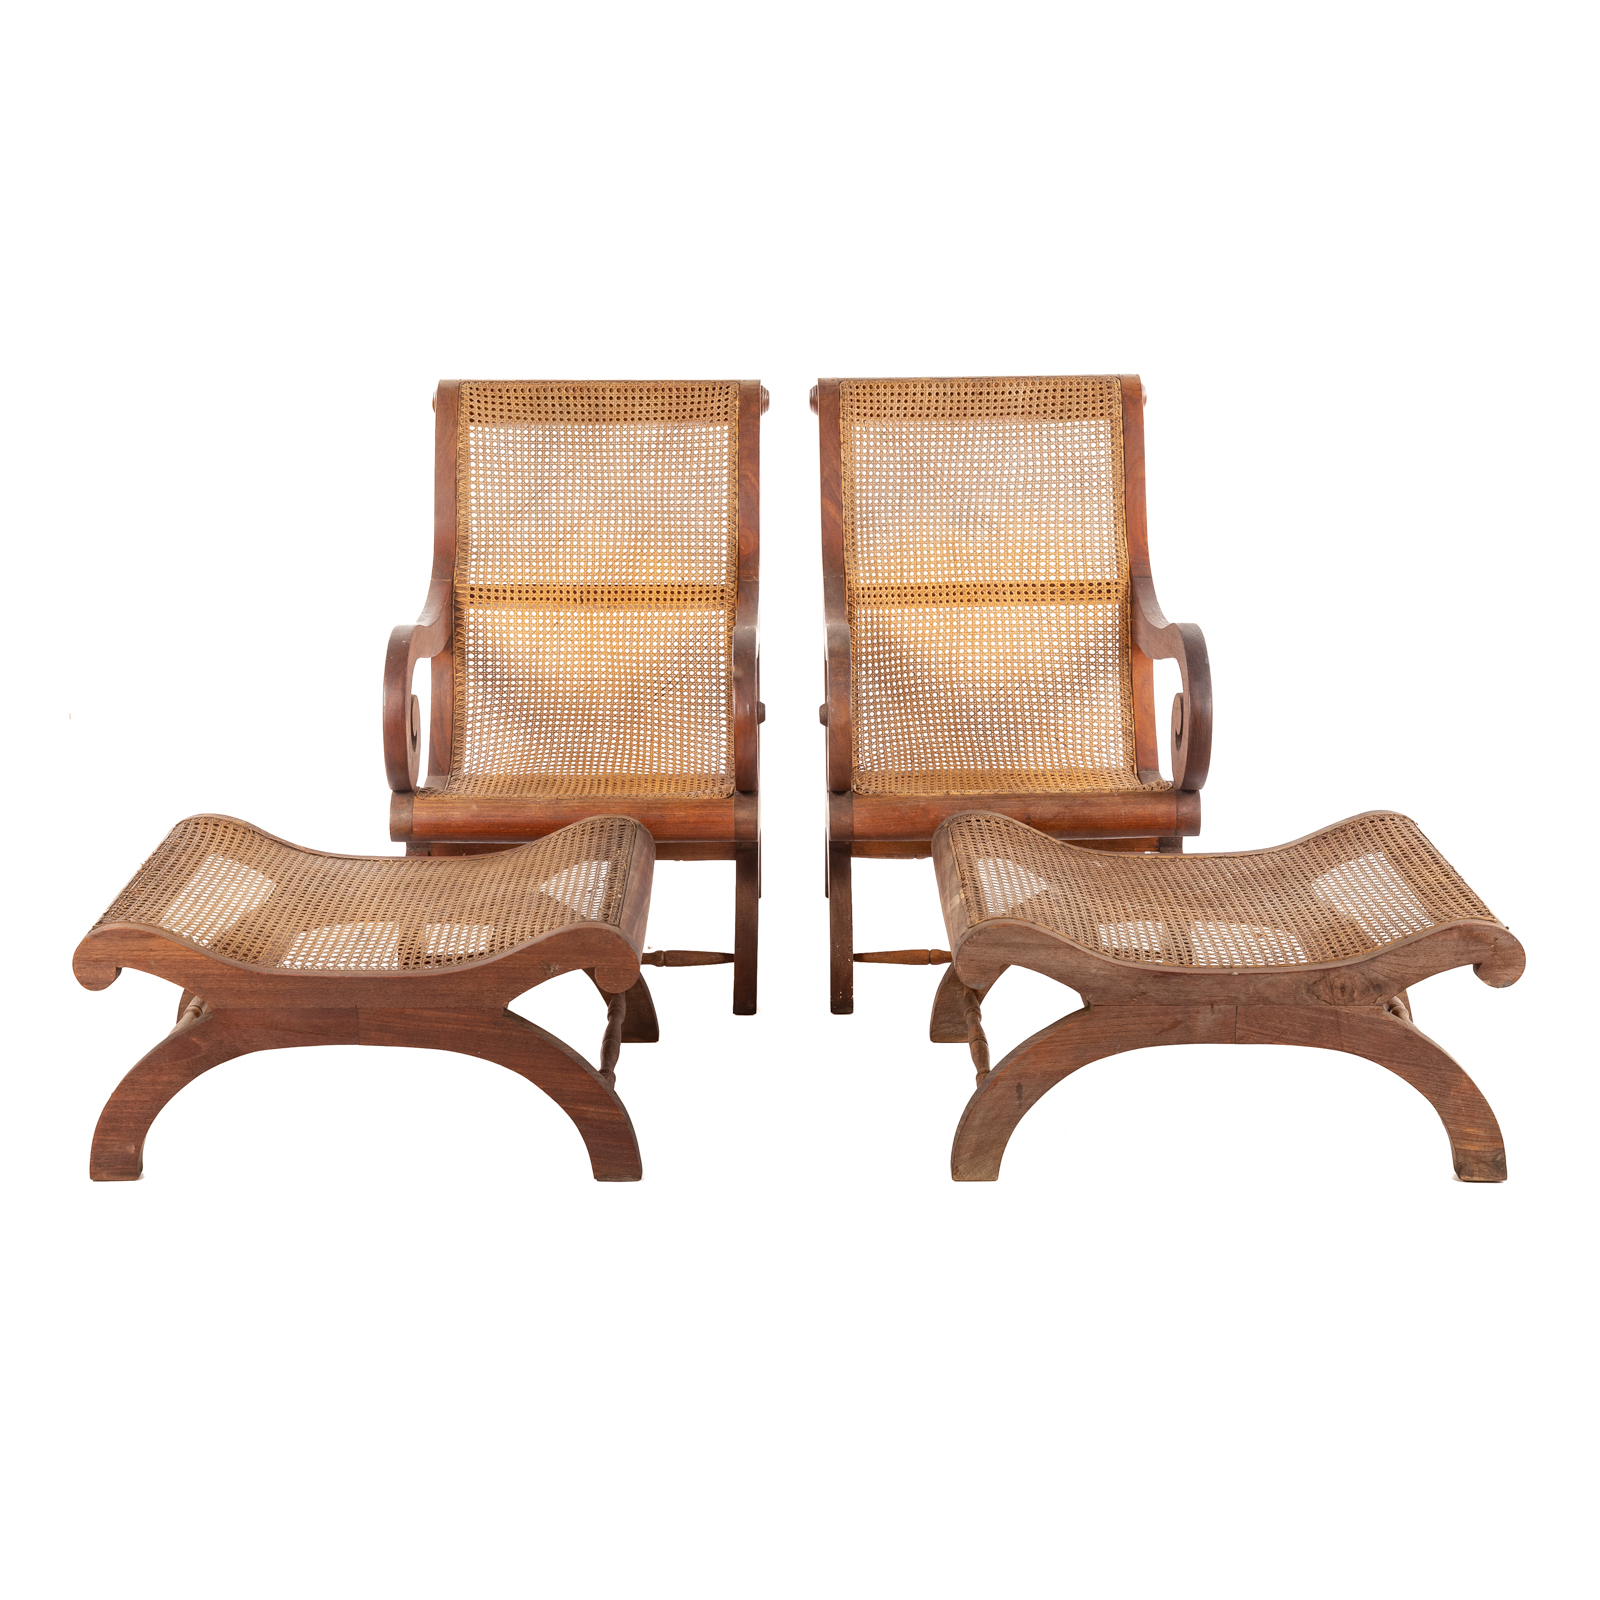 A PAIR OF BAUER CAMPECHE CHAIRS